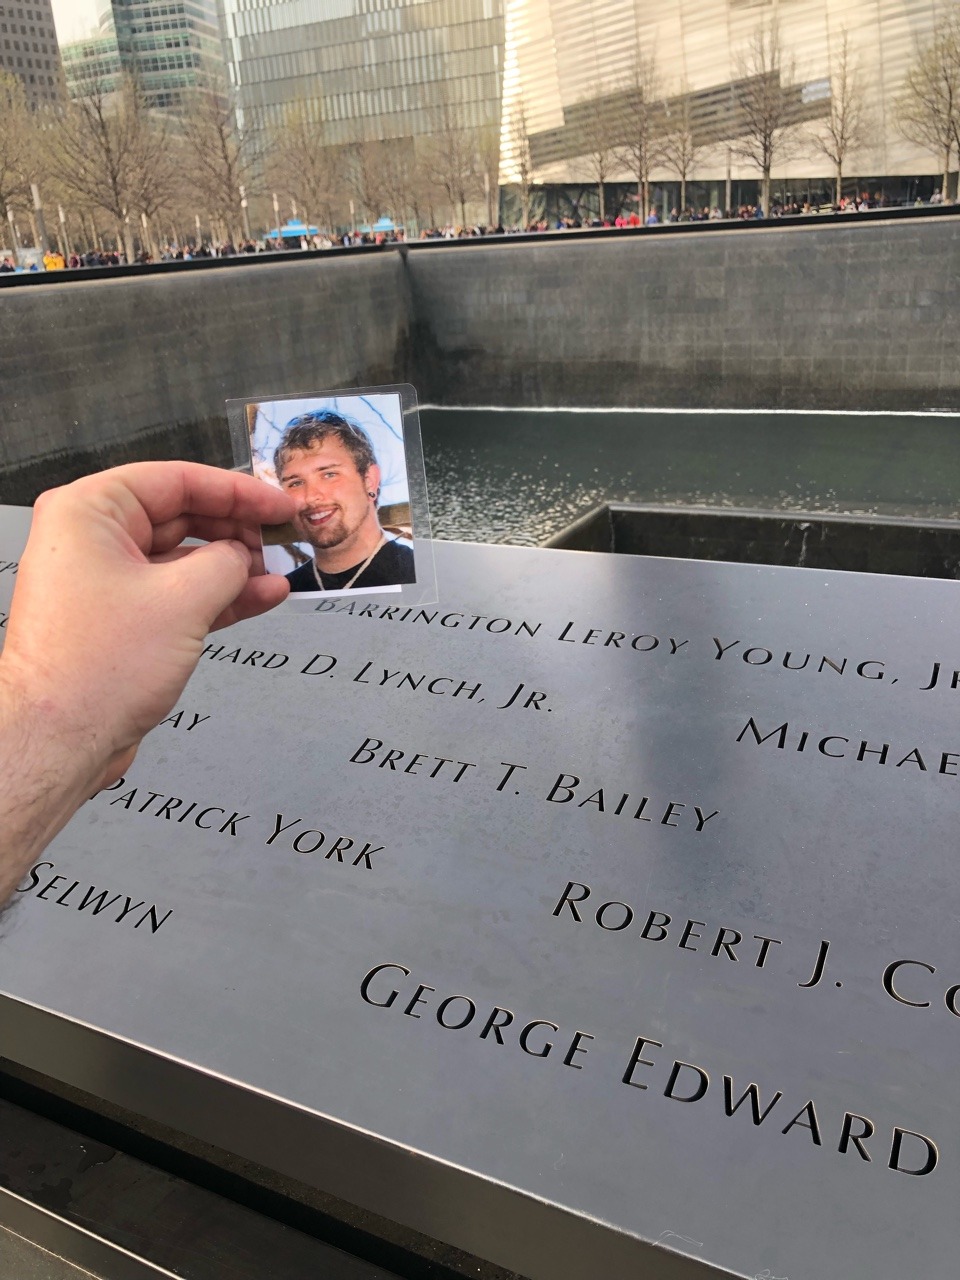 9/11 Memorial part 1/3Y’all I cannot emphasize enough how humbling this was!! Such a somber and incredible museum . Such a horrible event but a wonderful museum to honor the fallen and what happened.. I walked around choked up for well over an hour